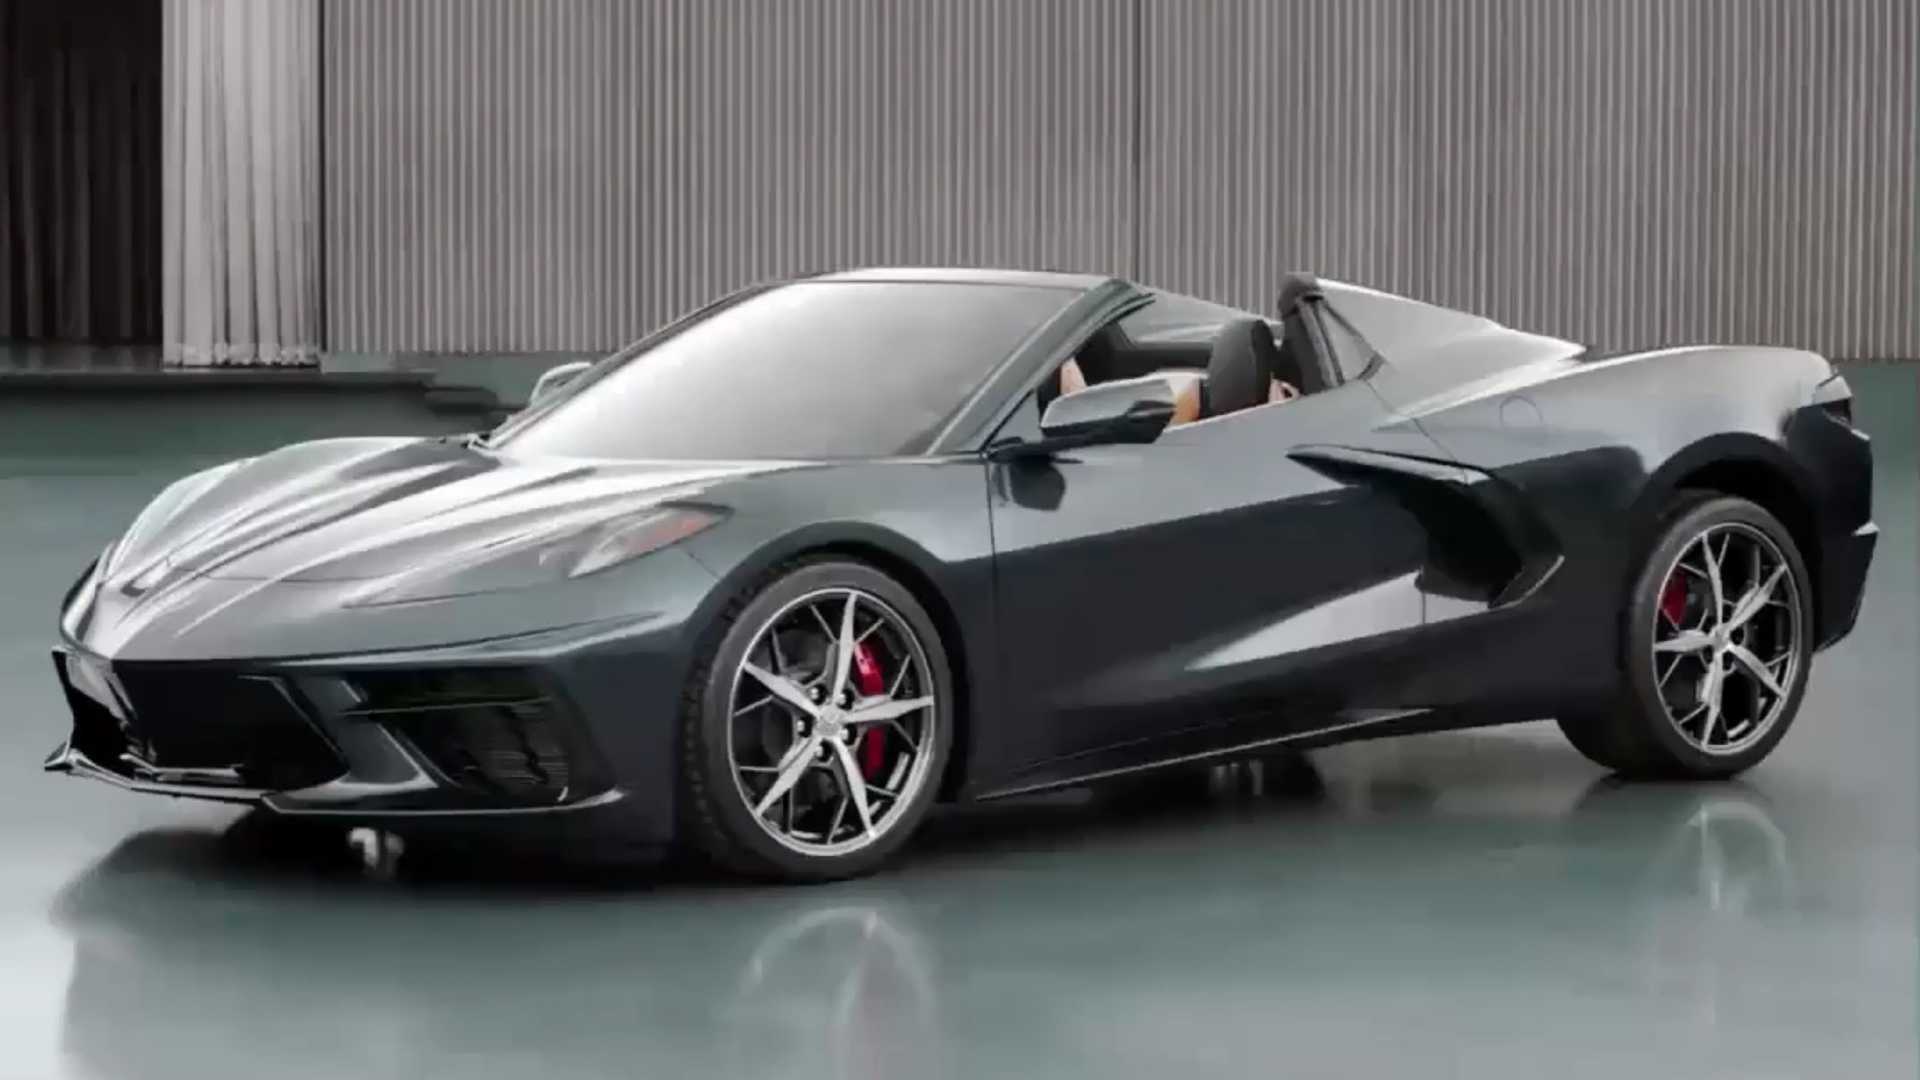 C8 Chevrolet Corvette Convertible Previewed At End Of Reveal